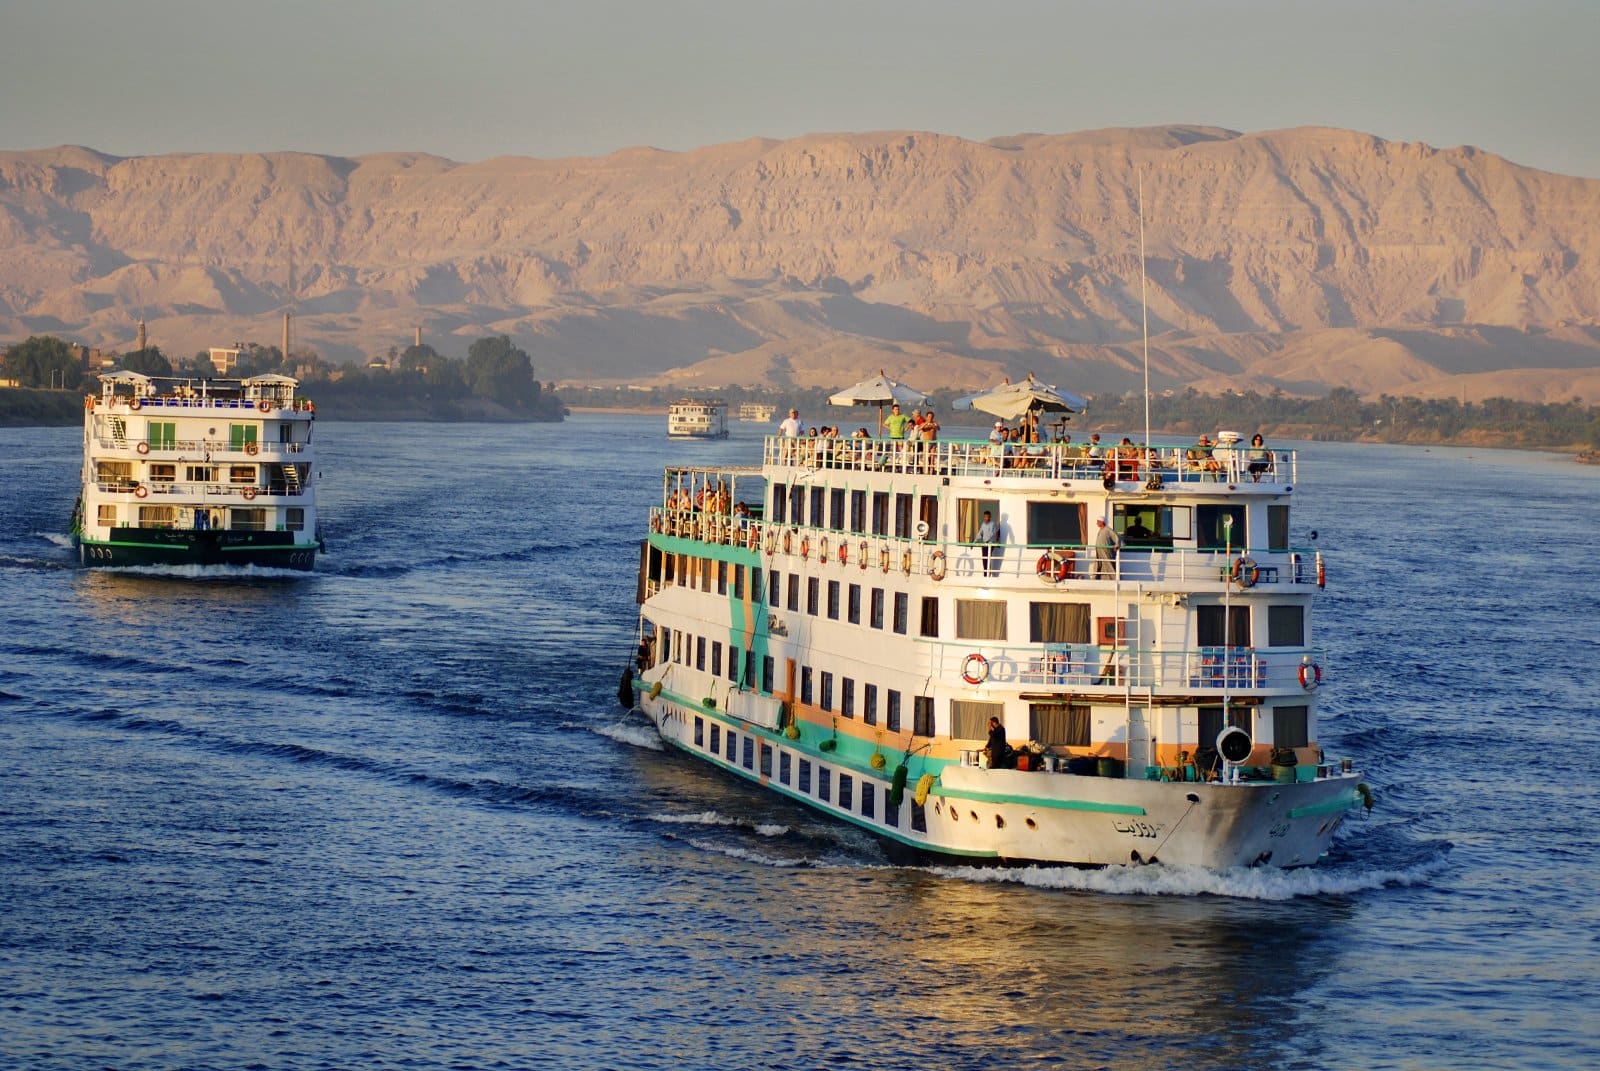 <p class="wp-caption-text">Image Credit: Shutterstock / meunierd</p>  <p><span>A Nile cruise offers a timeless journey between Luxor and Aswan, allowing travelers to experience Egypt’s ancient wonders from the comfort of a riverboat. Stops typically include major sites like the Temple of Kom Ombo and Edfu, with guided tours and scenic views along the way.</span></p>